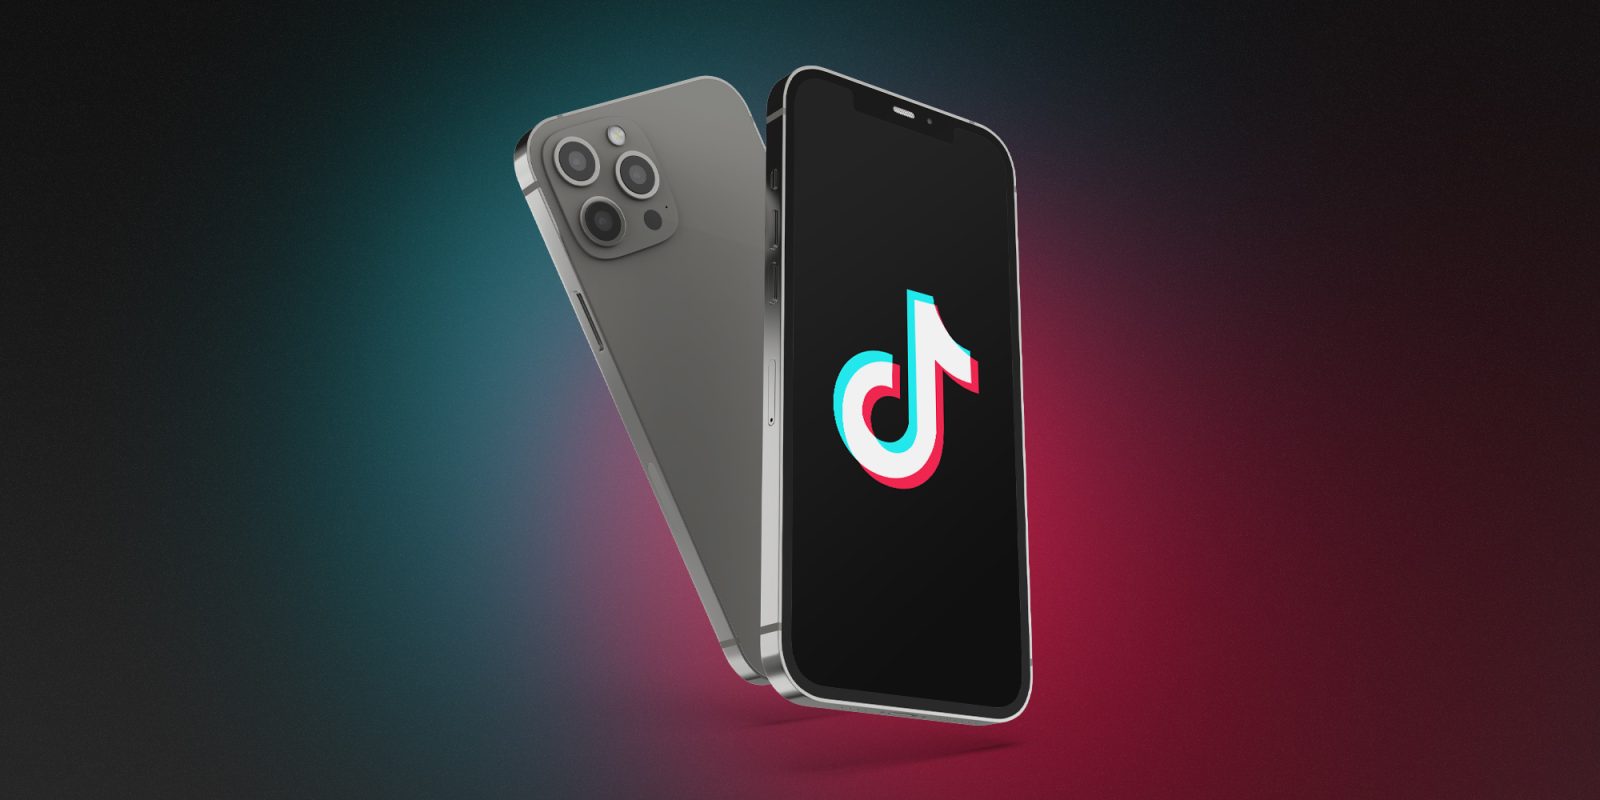 You can now subscribe to your favorite LIVE TikTok creators